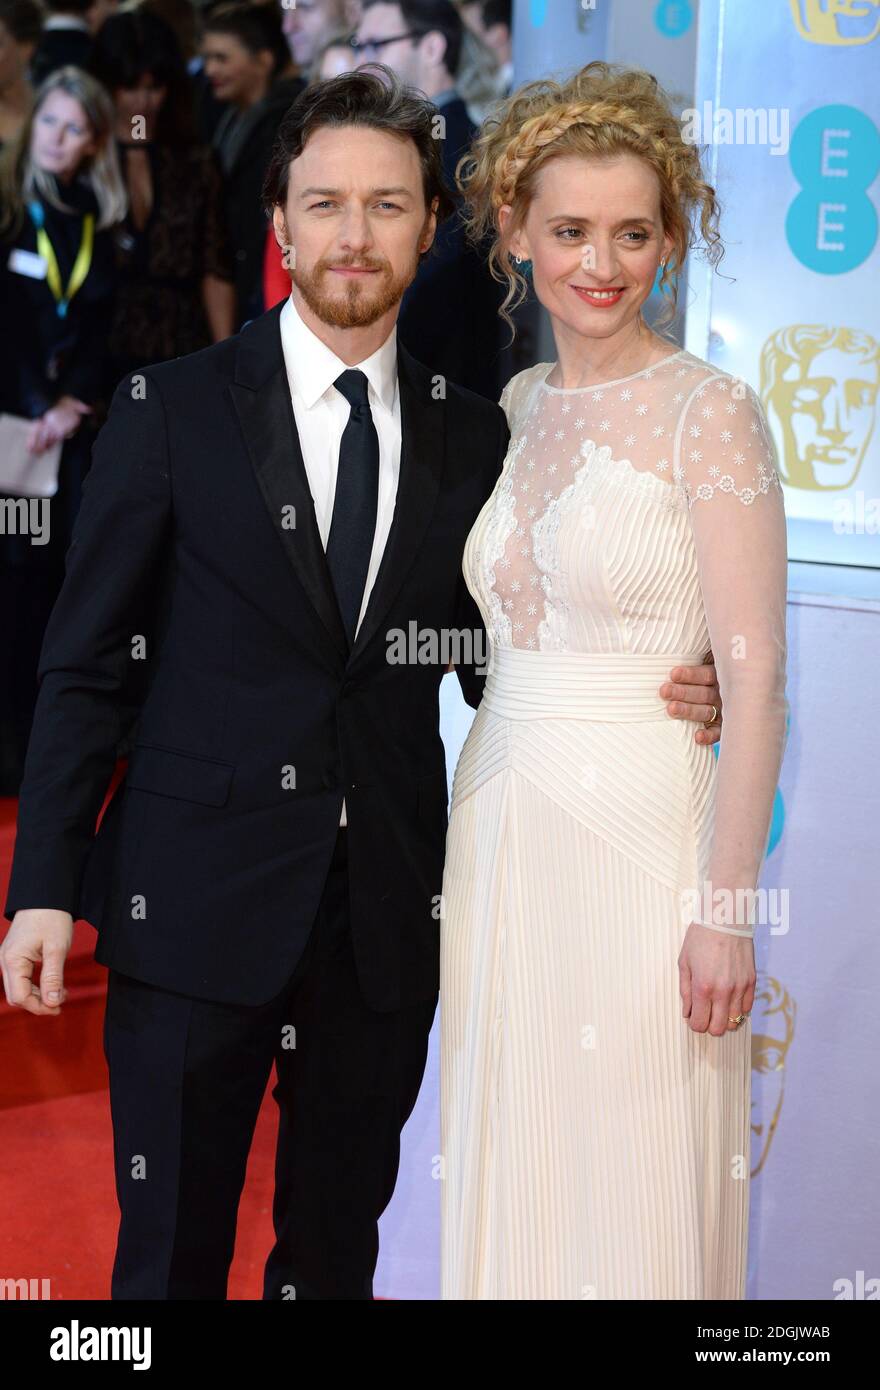 James McAvoy and wife Anne-Marie Duff attending the EE British Academy Film Awards 2015 held at the Royal Opera House in Covent Garden, London UK. Stock Photo